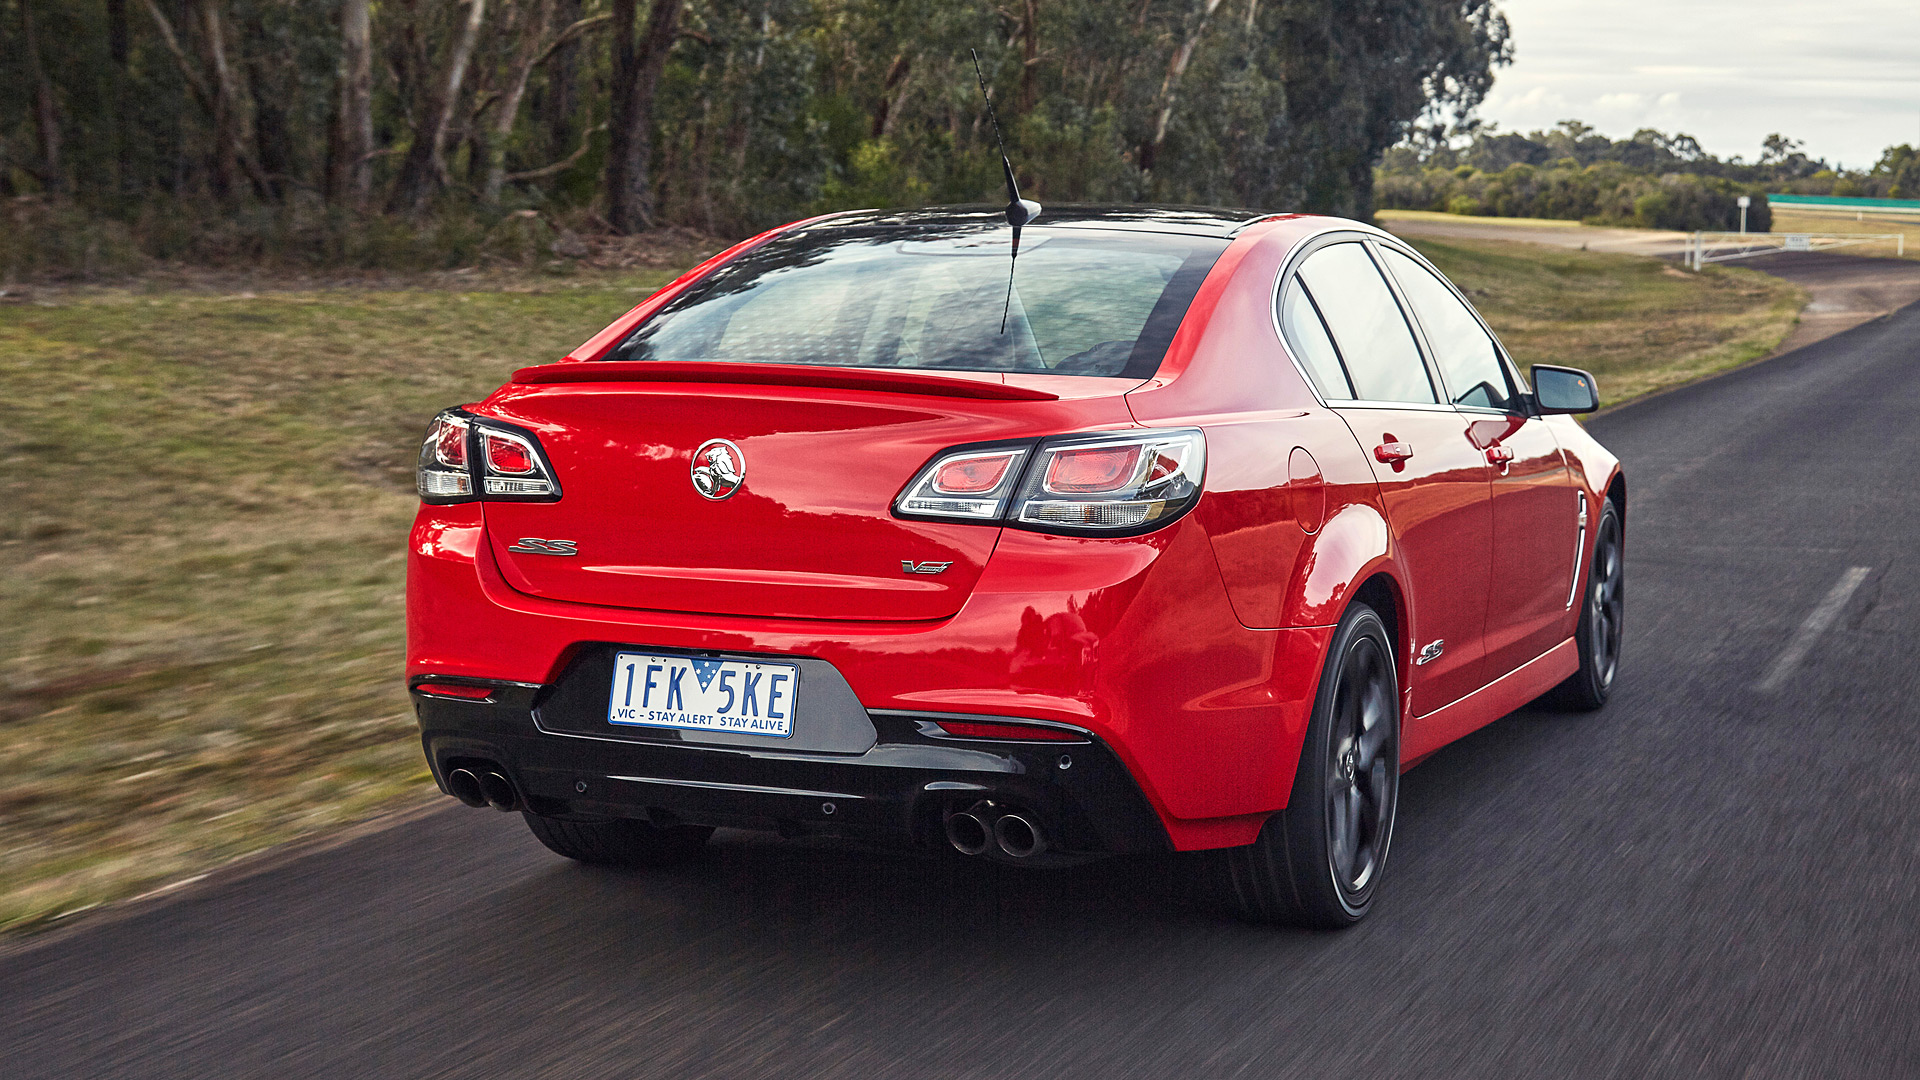 2015 Holden Commodore Ssv Picture - 2016 Holden Commodore , HD Wallpaper & Backgrounds